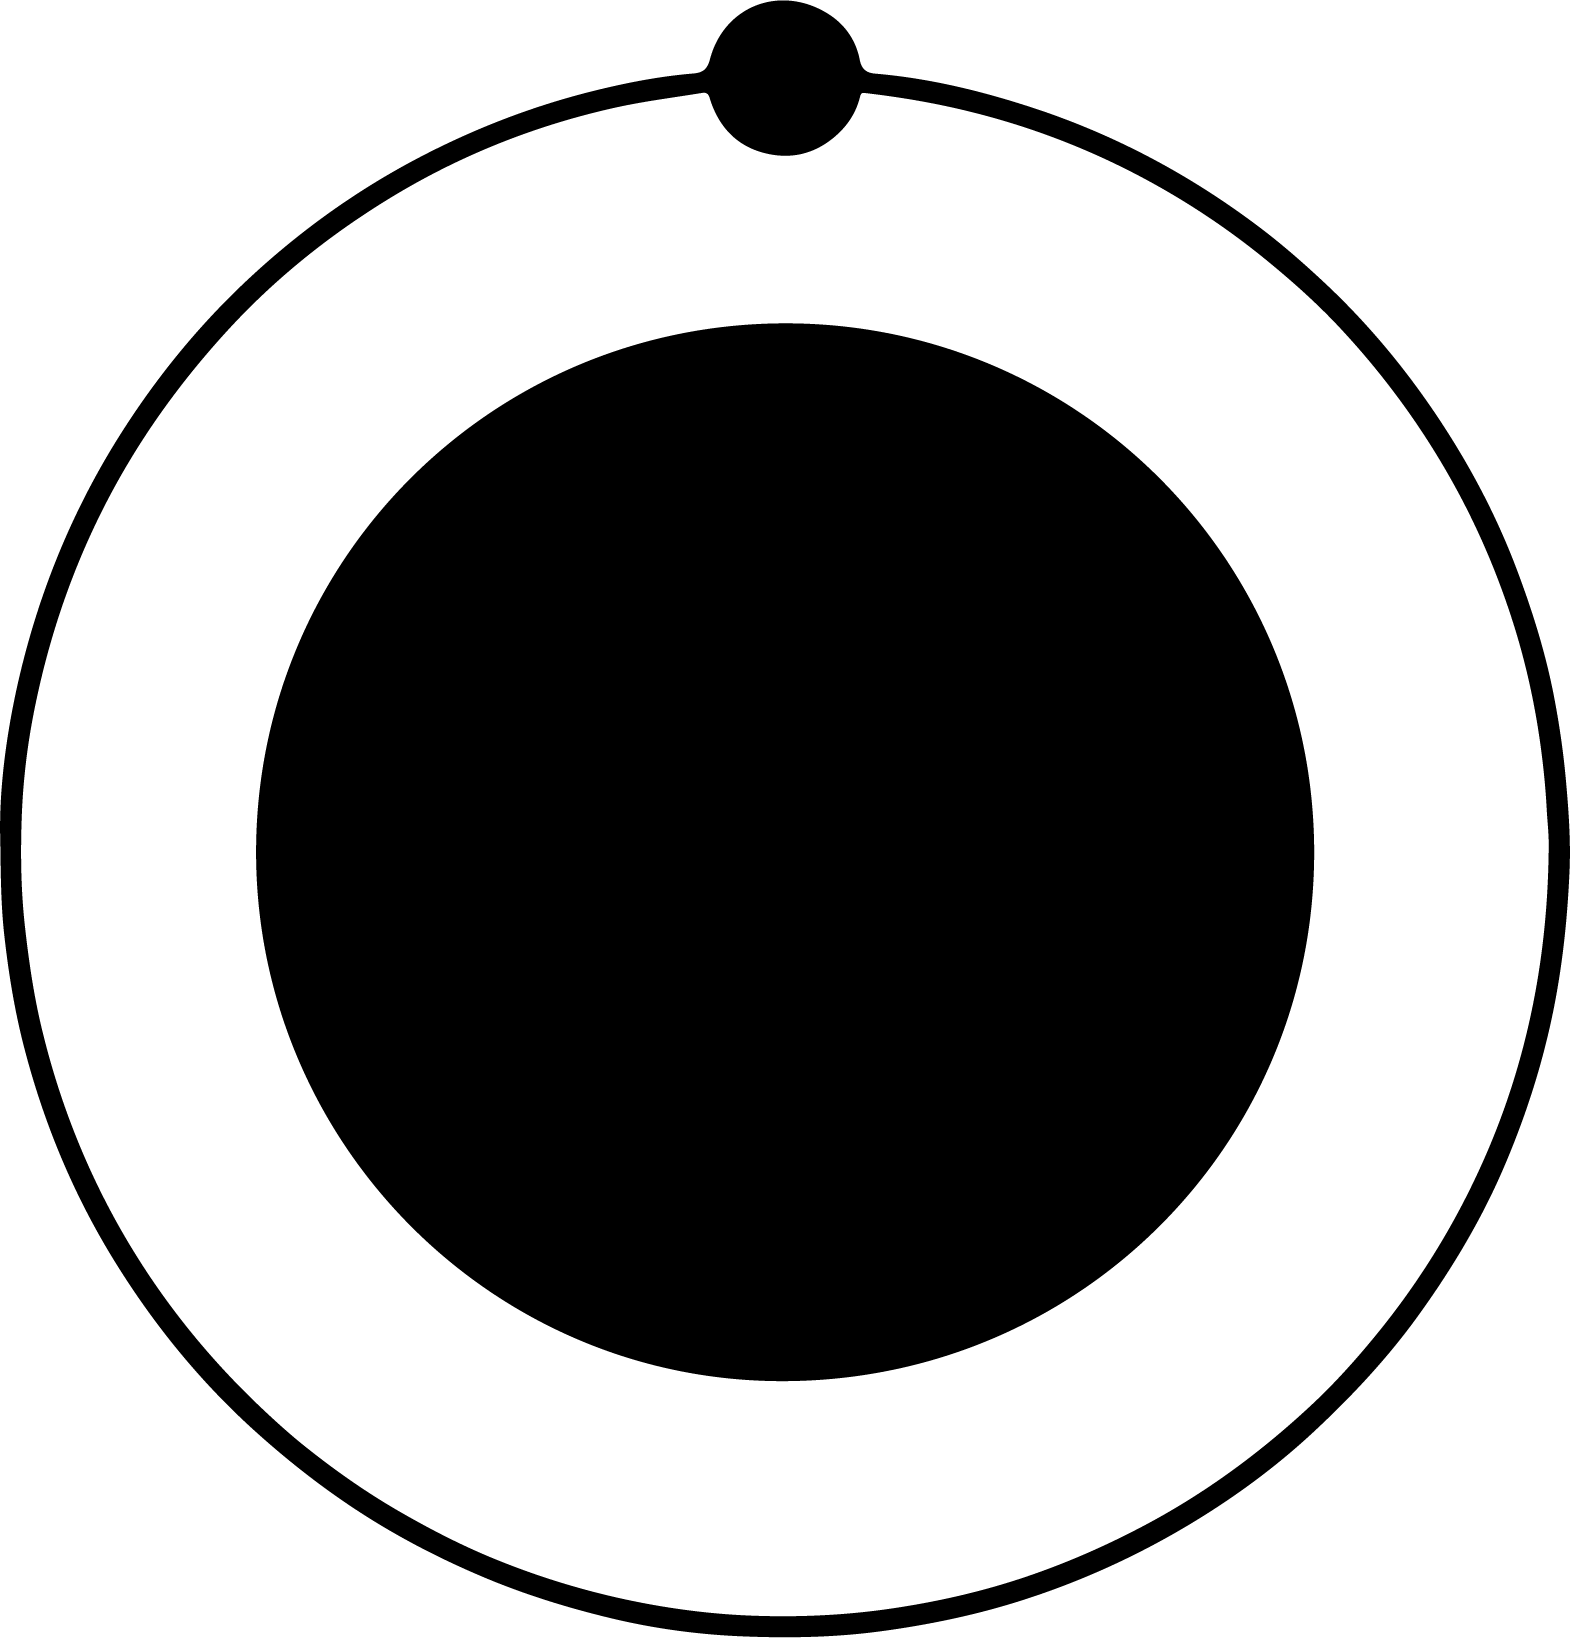 A drawing of a hydrogen atom represented as a large black circle on a white background surrounded by a thin black ring with a small black circle on it positioned directly above the large circle.